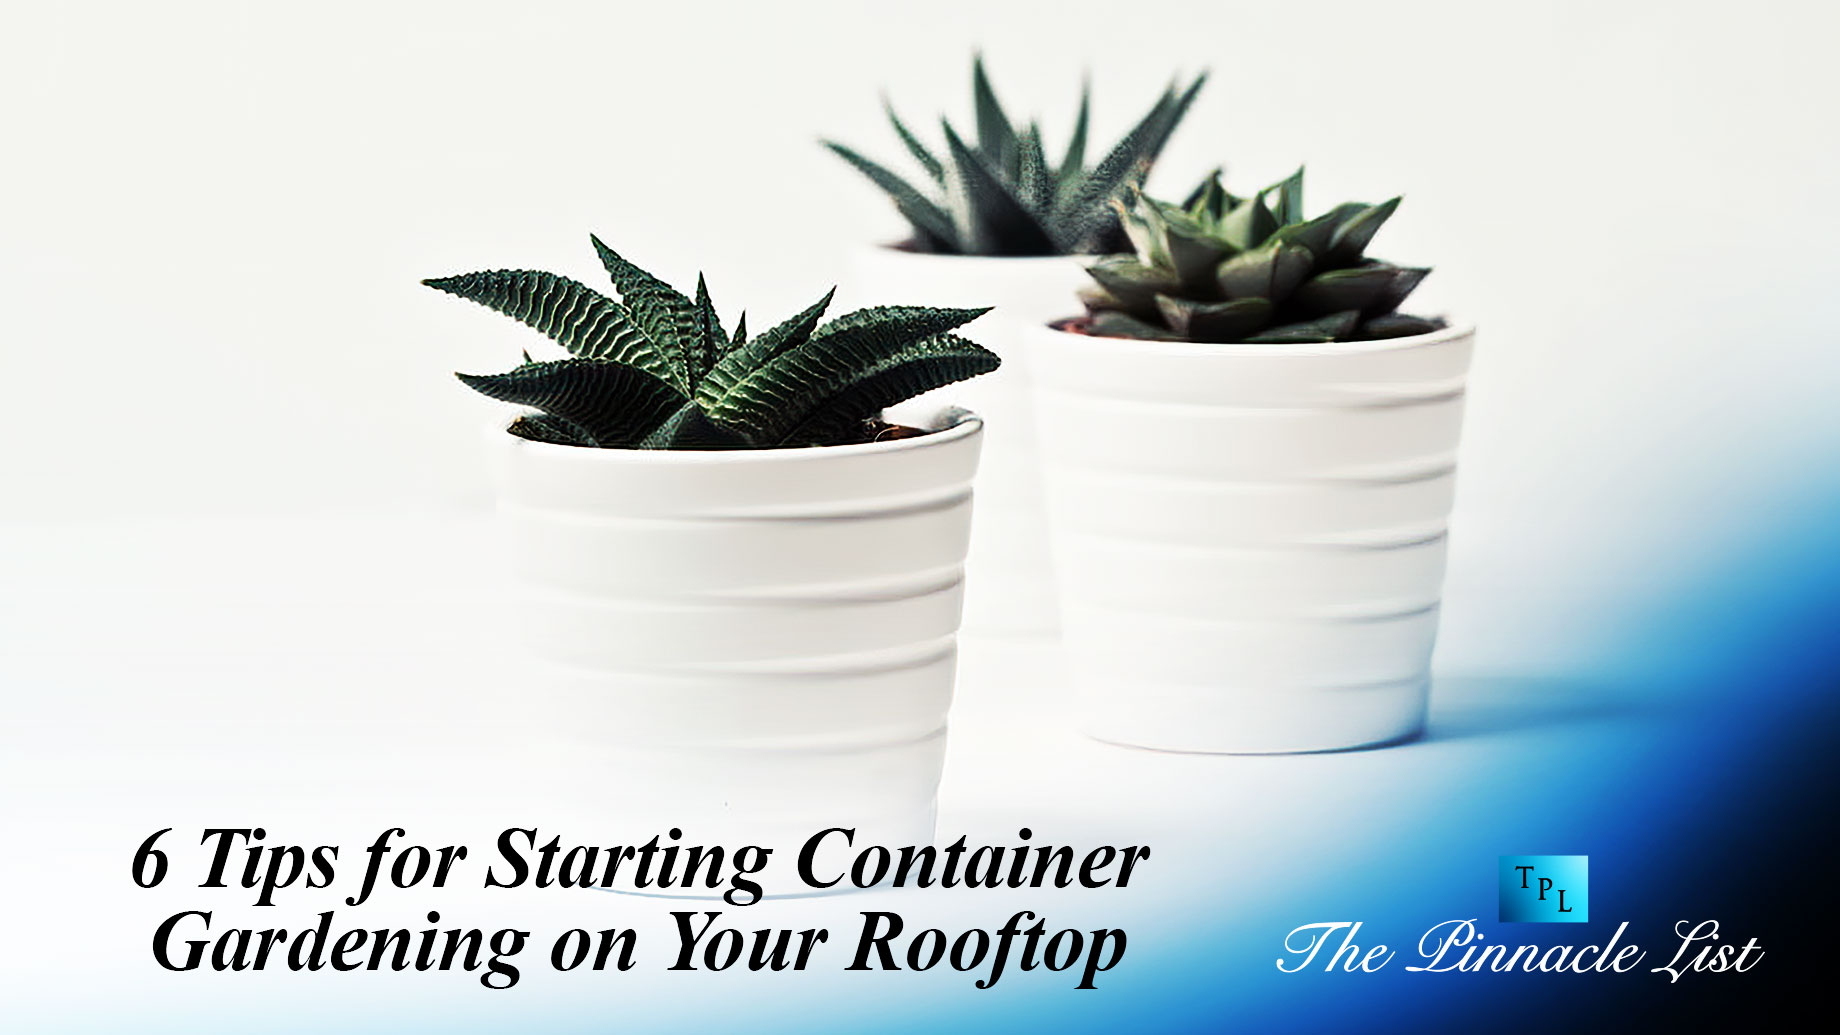 6 Tips for Starting Container Gardening on Your Rooftop